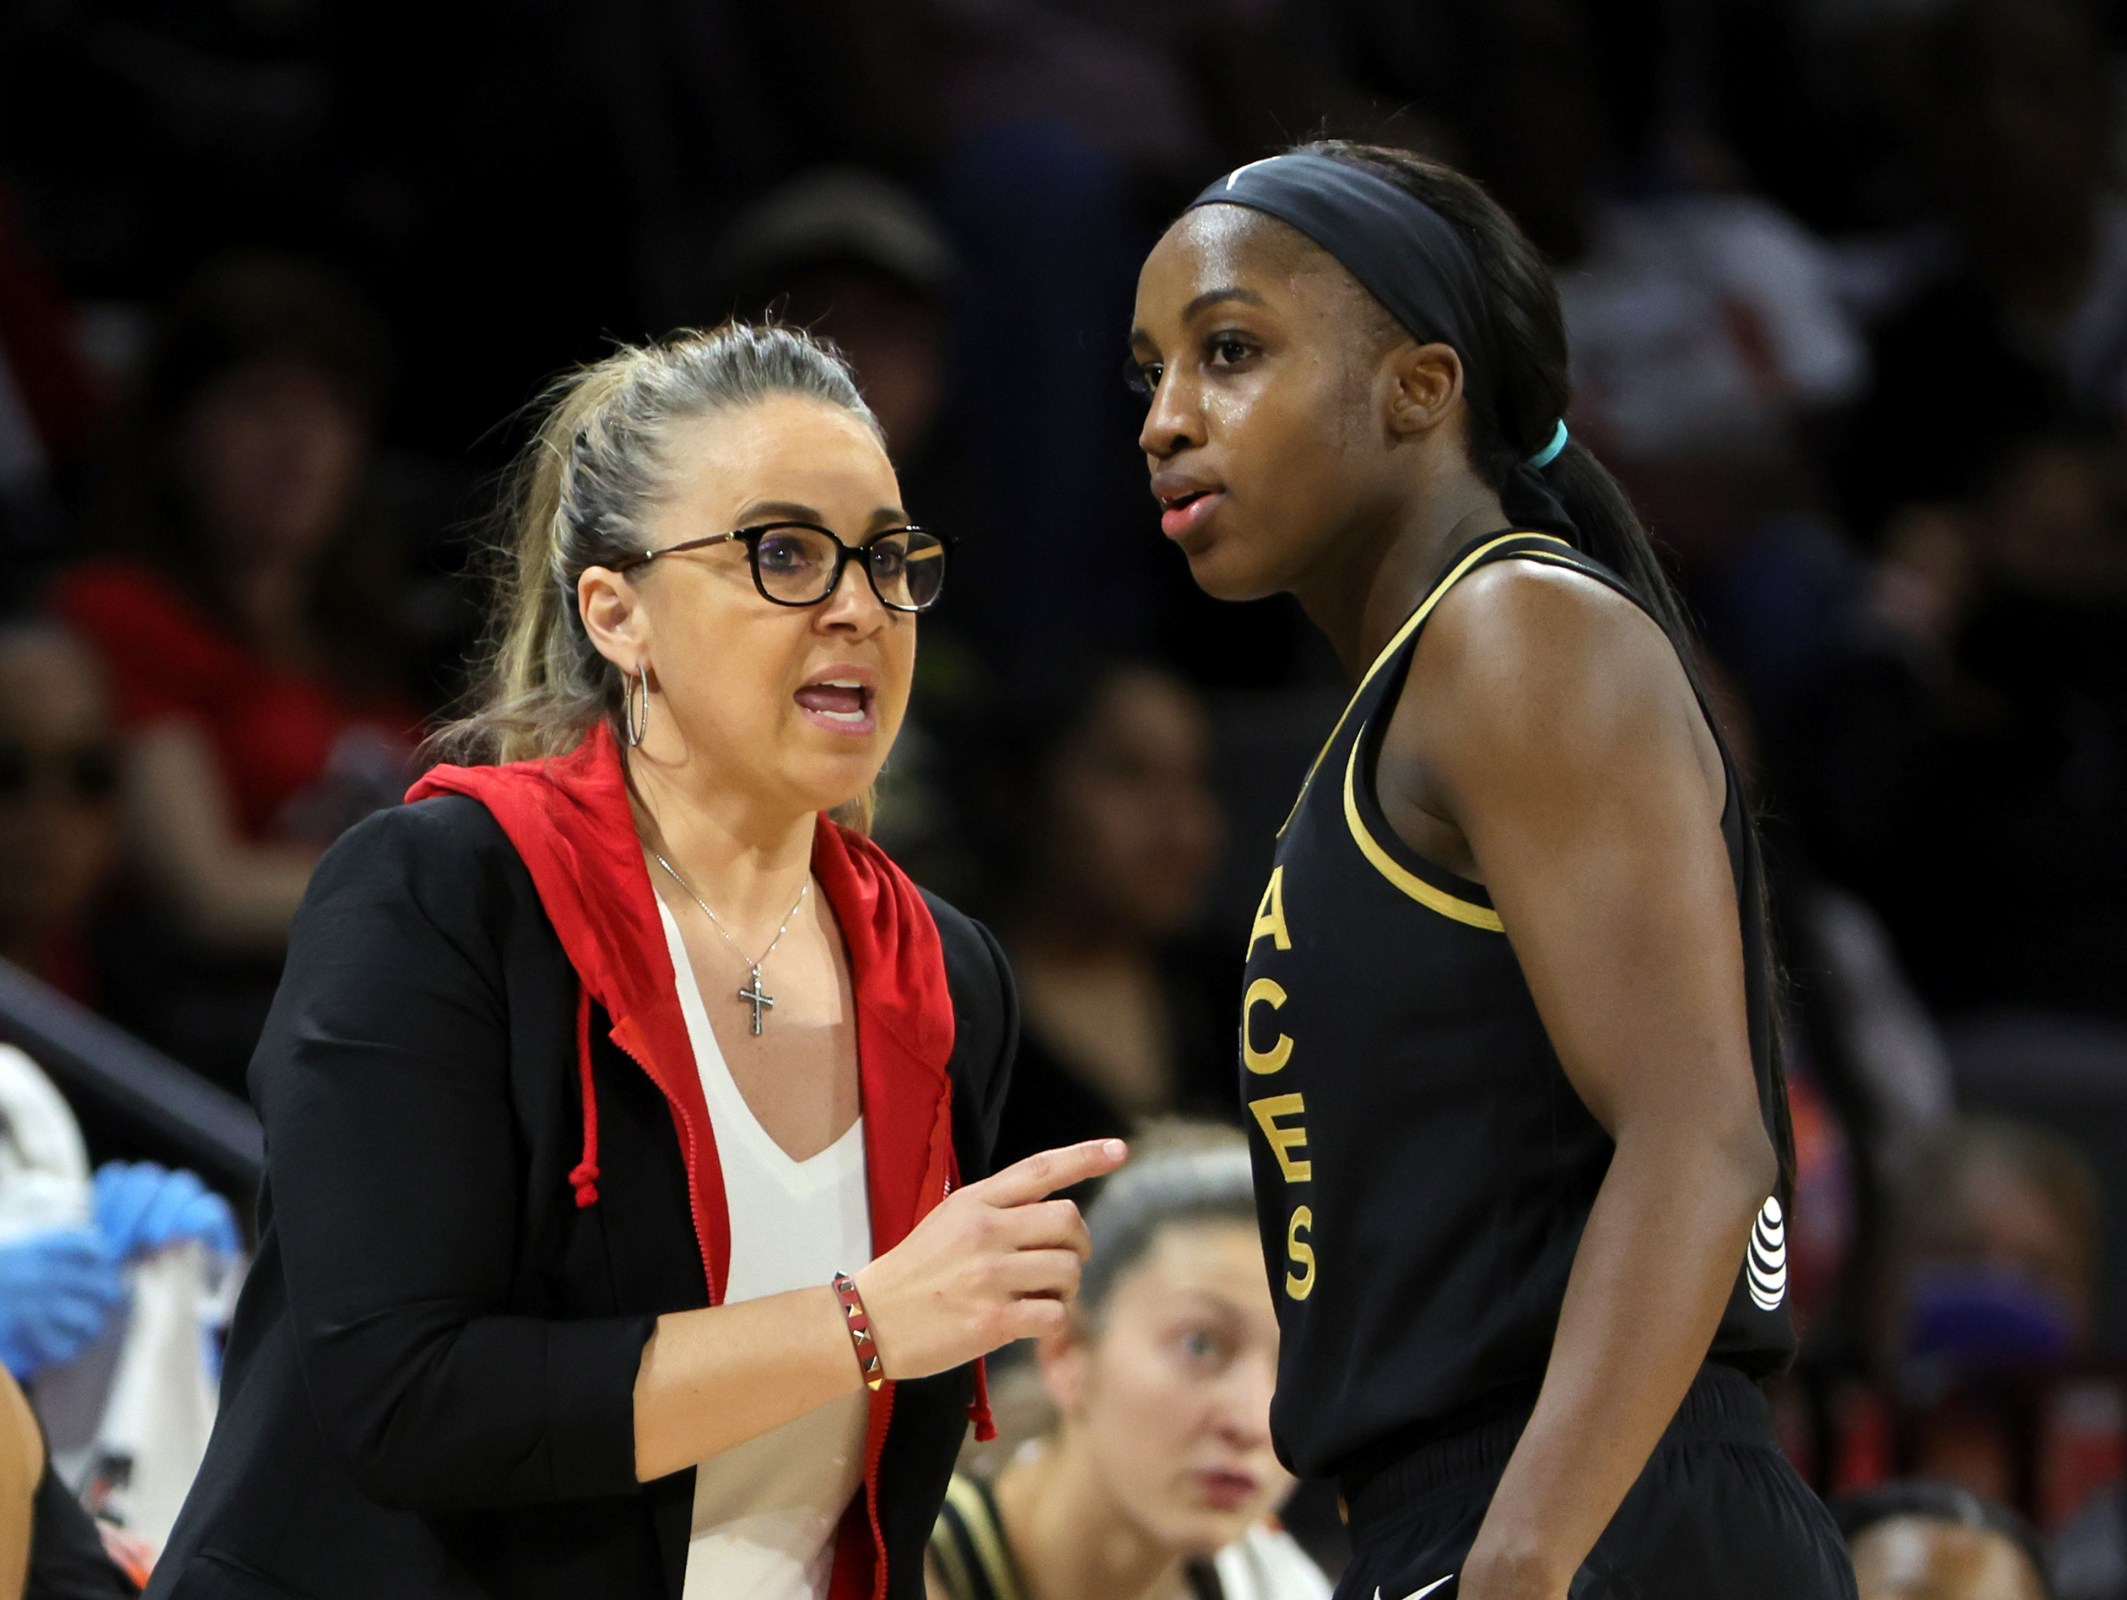 Head coach Becky Hammon of the Las Vegas Aces talks with Jackie Young #0 during their game against the Seattle Storm at Michelob ULTRA Arena on May 08, 2022 in Las Vegas, Nevada. The Aces defeated the Storm 85-74.